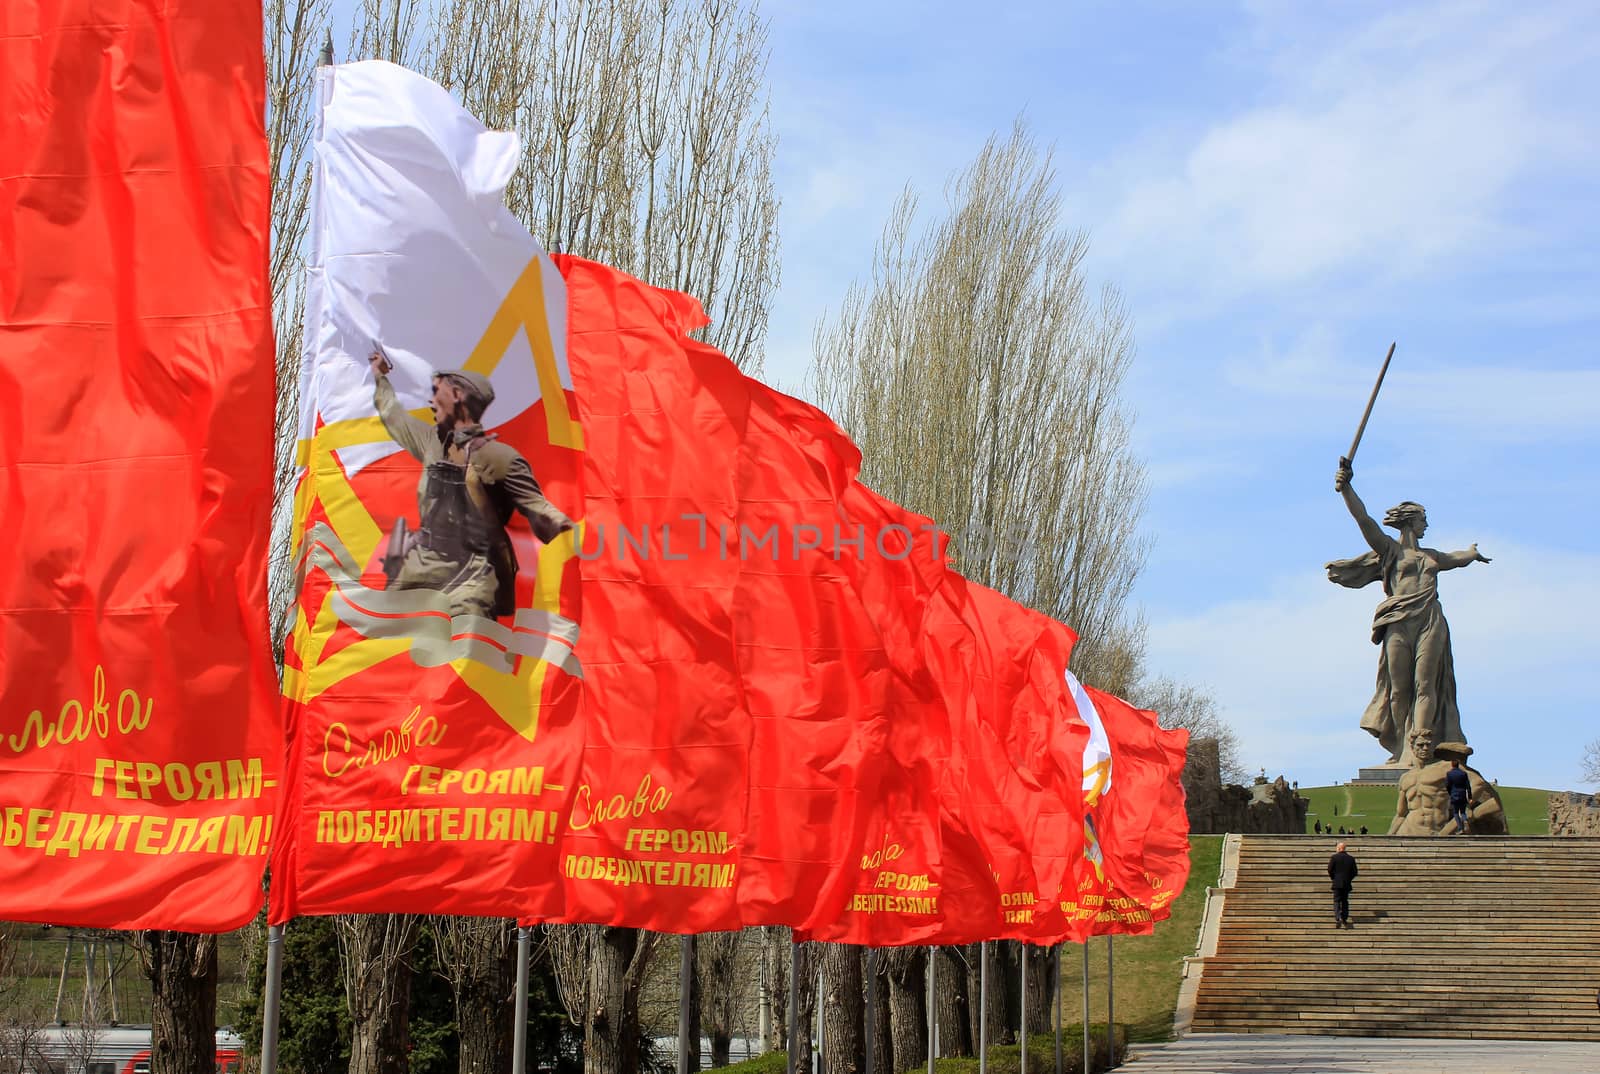 Festive flags with an inscription "Glory to conquering heroes!" on Mamayev Kurgan in Volgograd